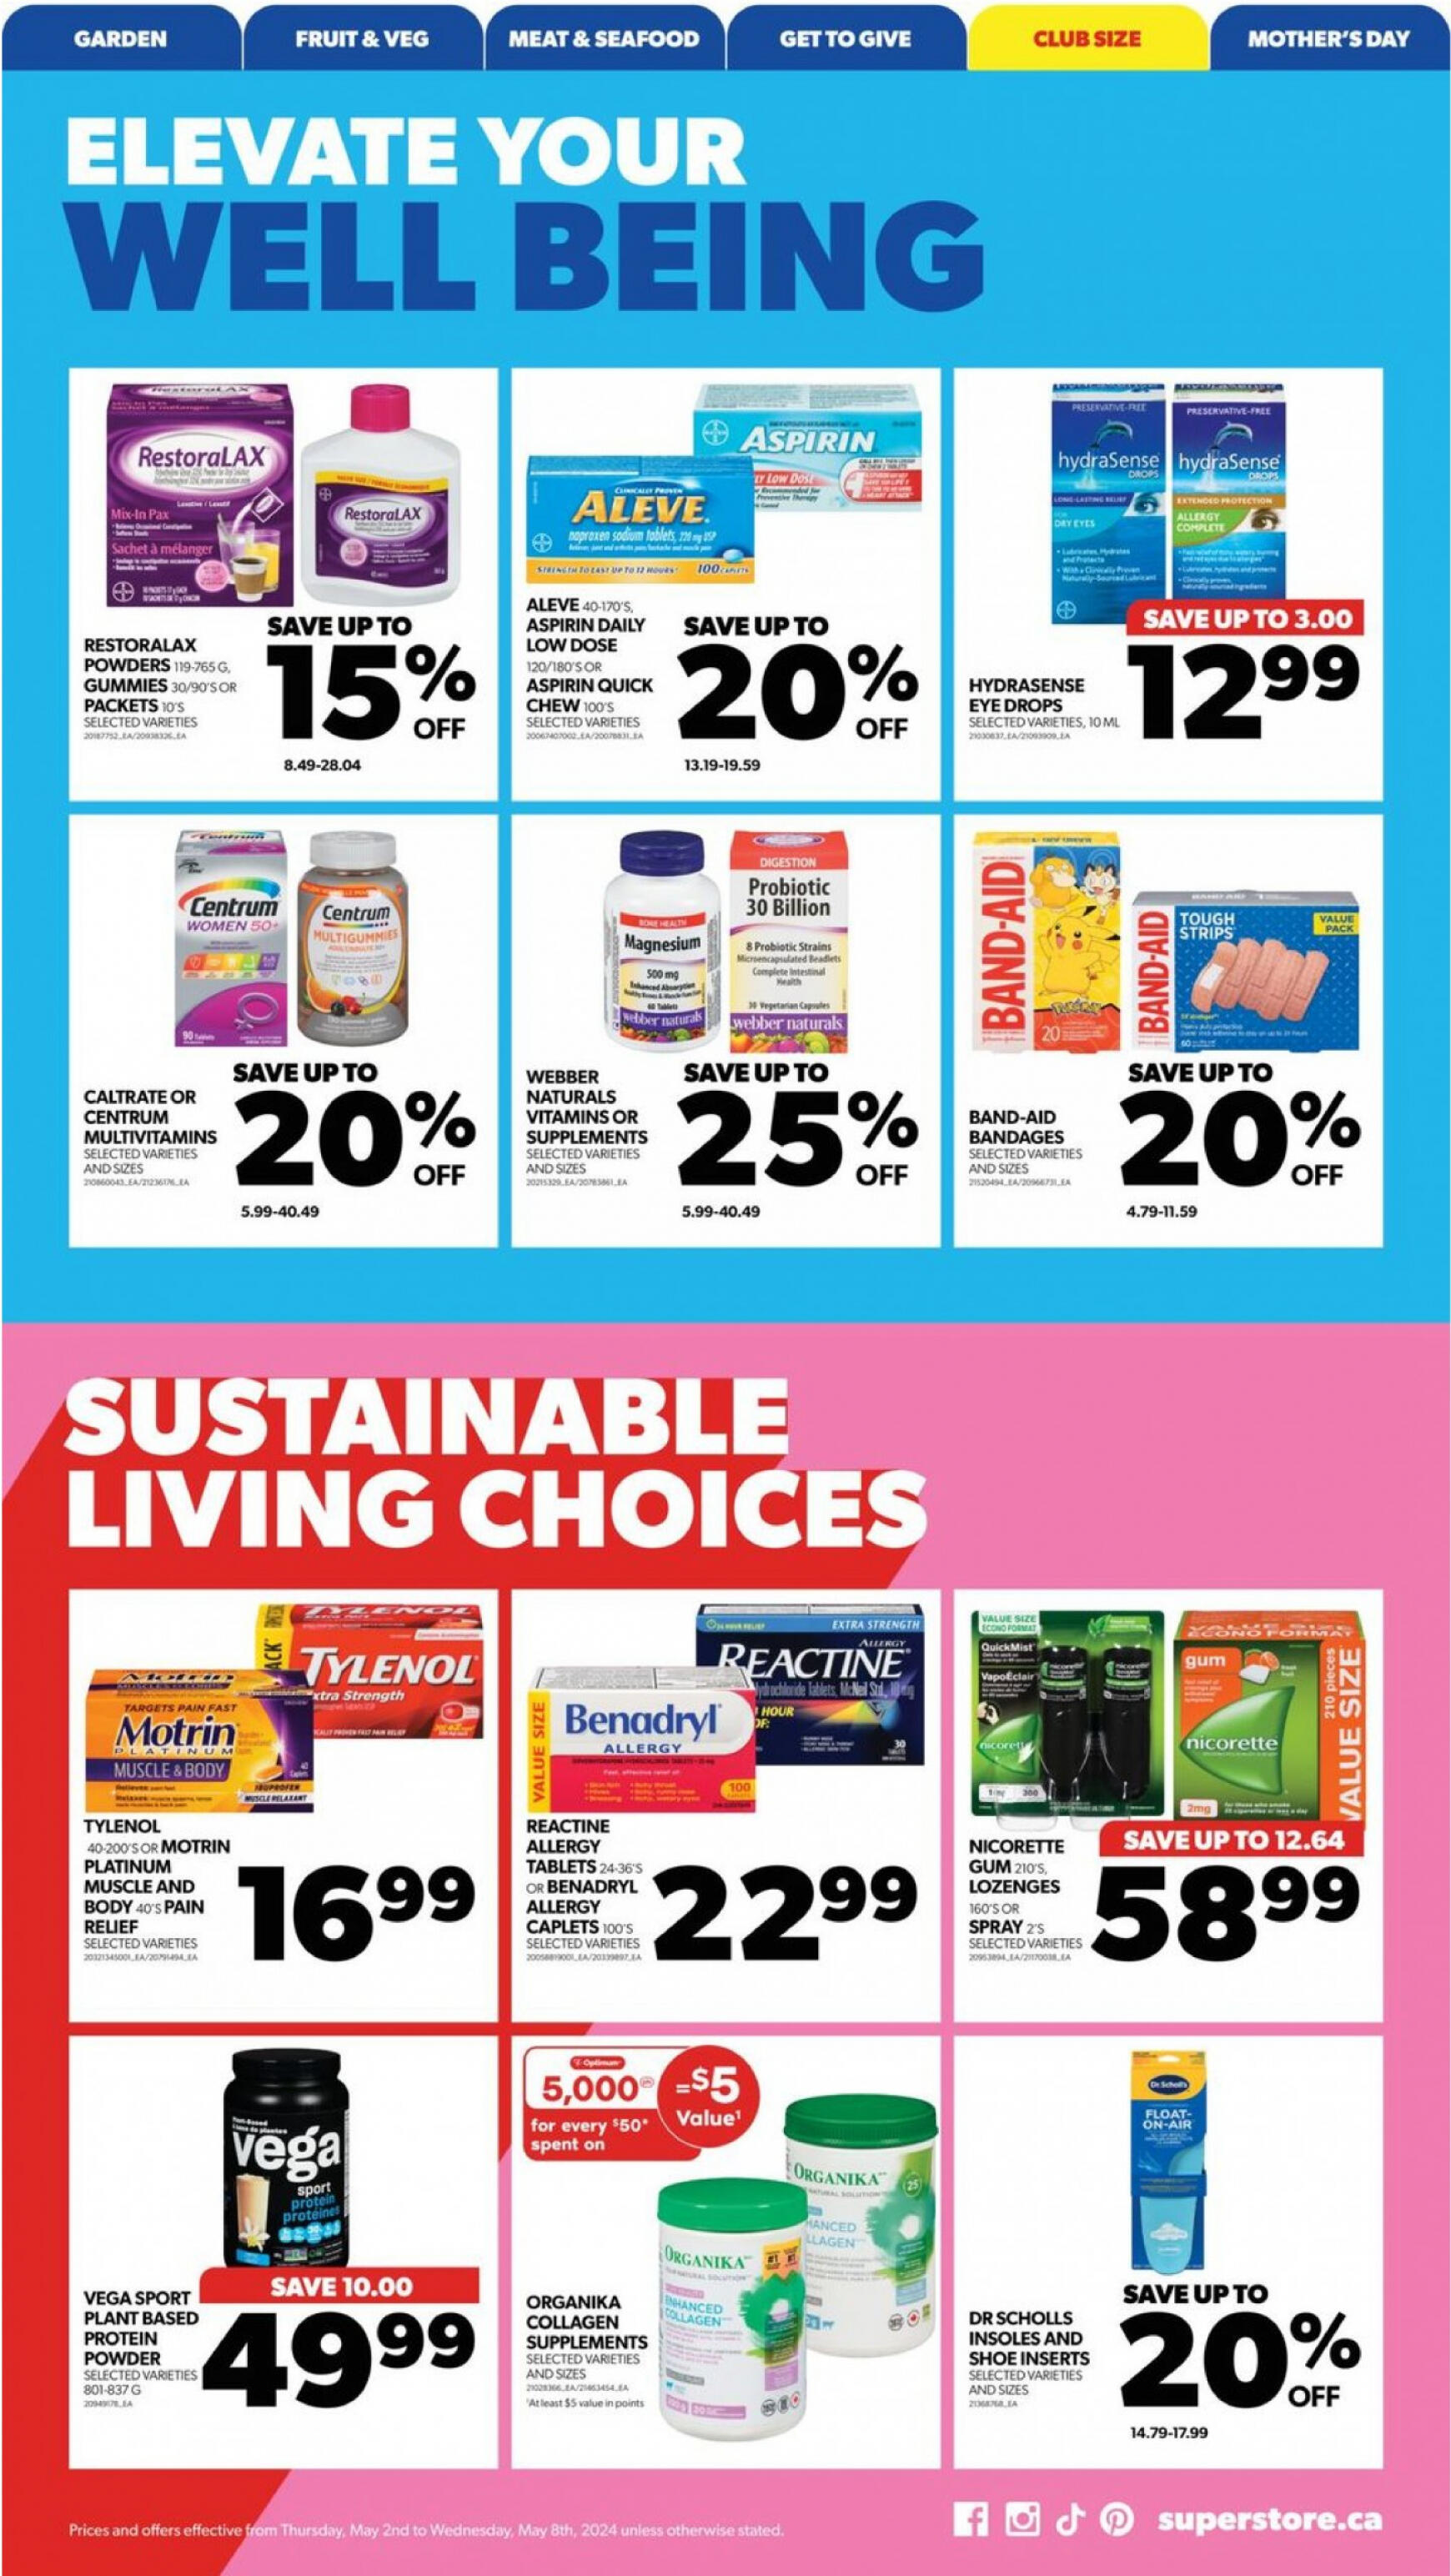 real-canadian-superstore - Real Canadian Superstore flyer current 02.05. - 08.05. - page: 24